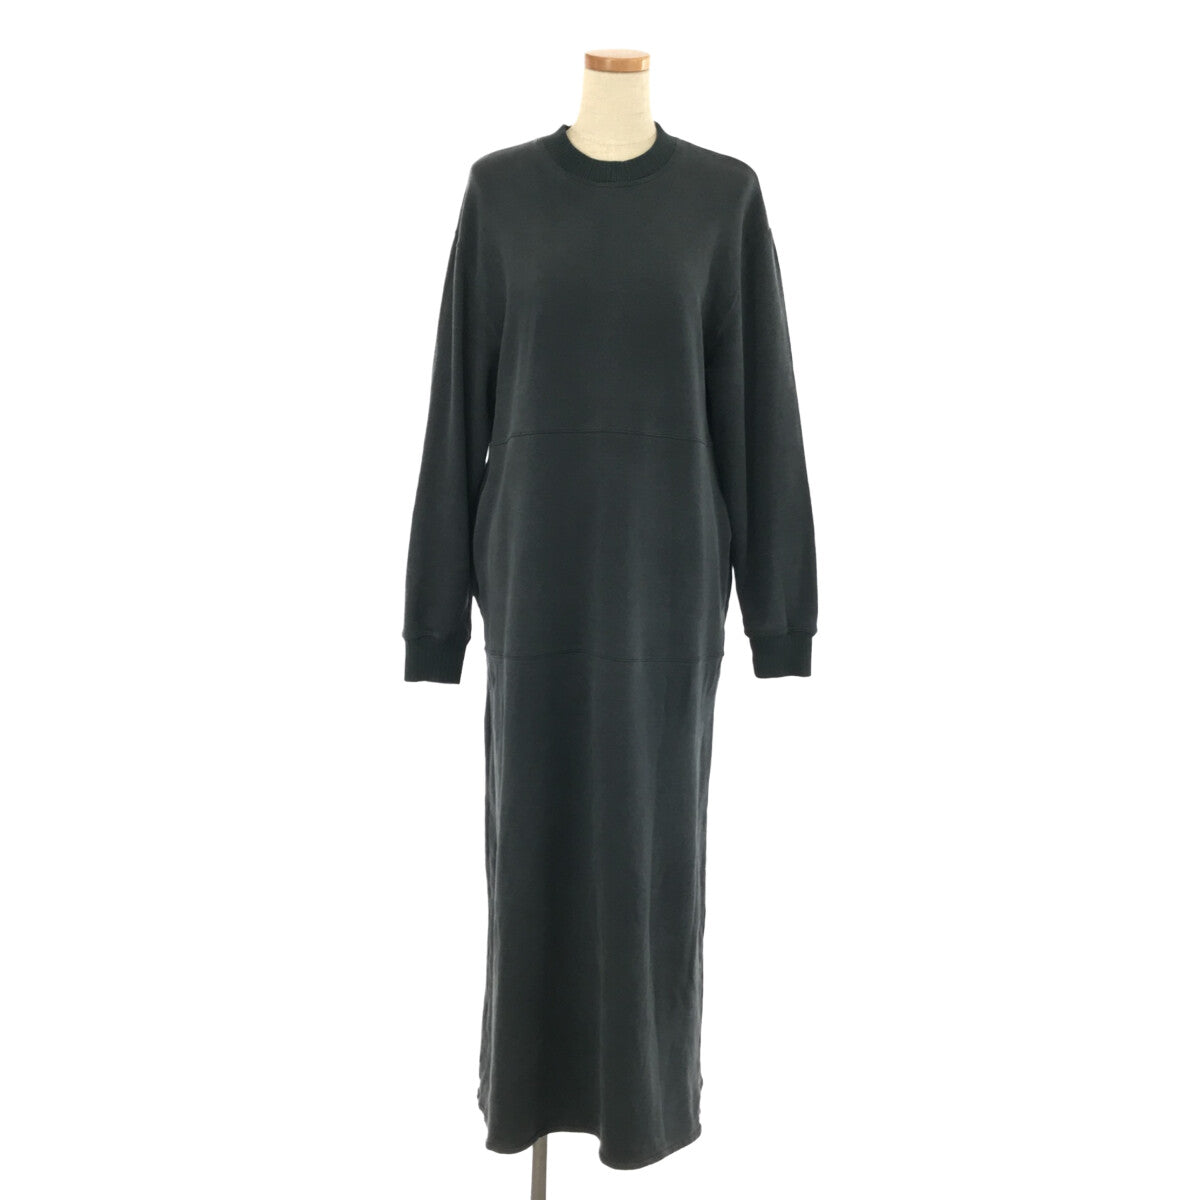 R.H.VINTAGE / ロンハーマンヴィンテージ | Faded Long Sleeve Dress 